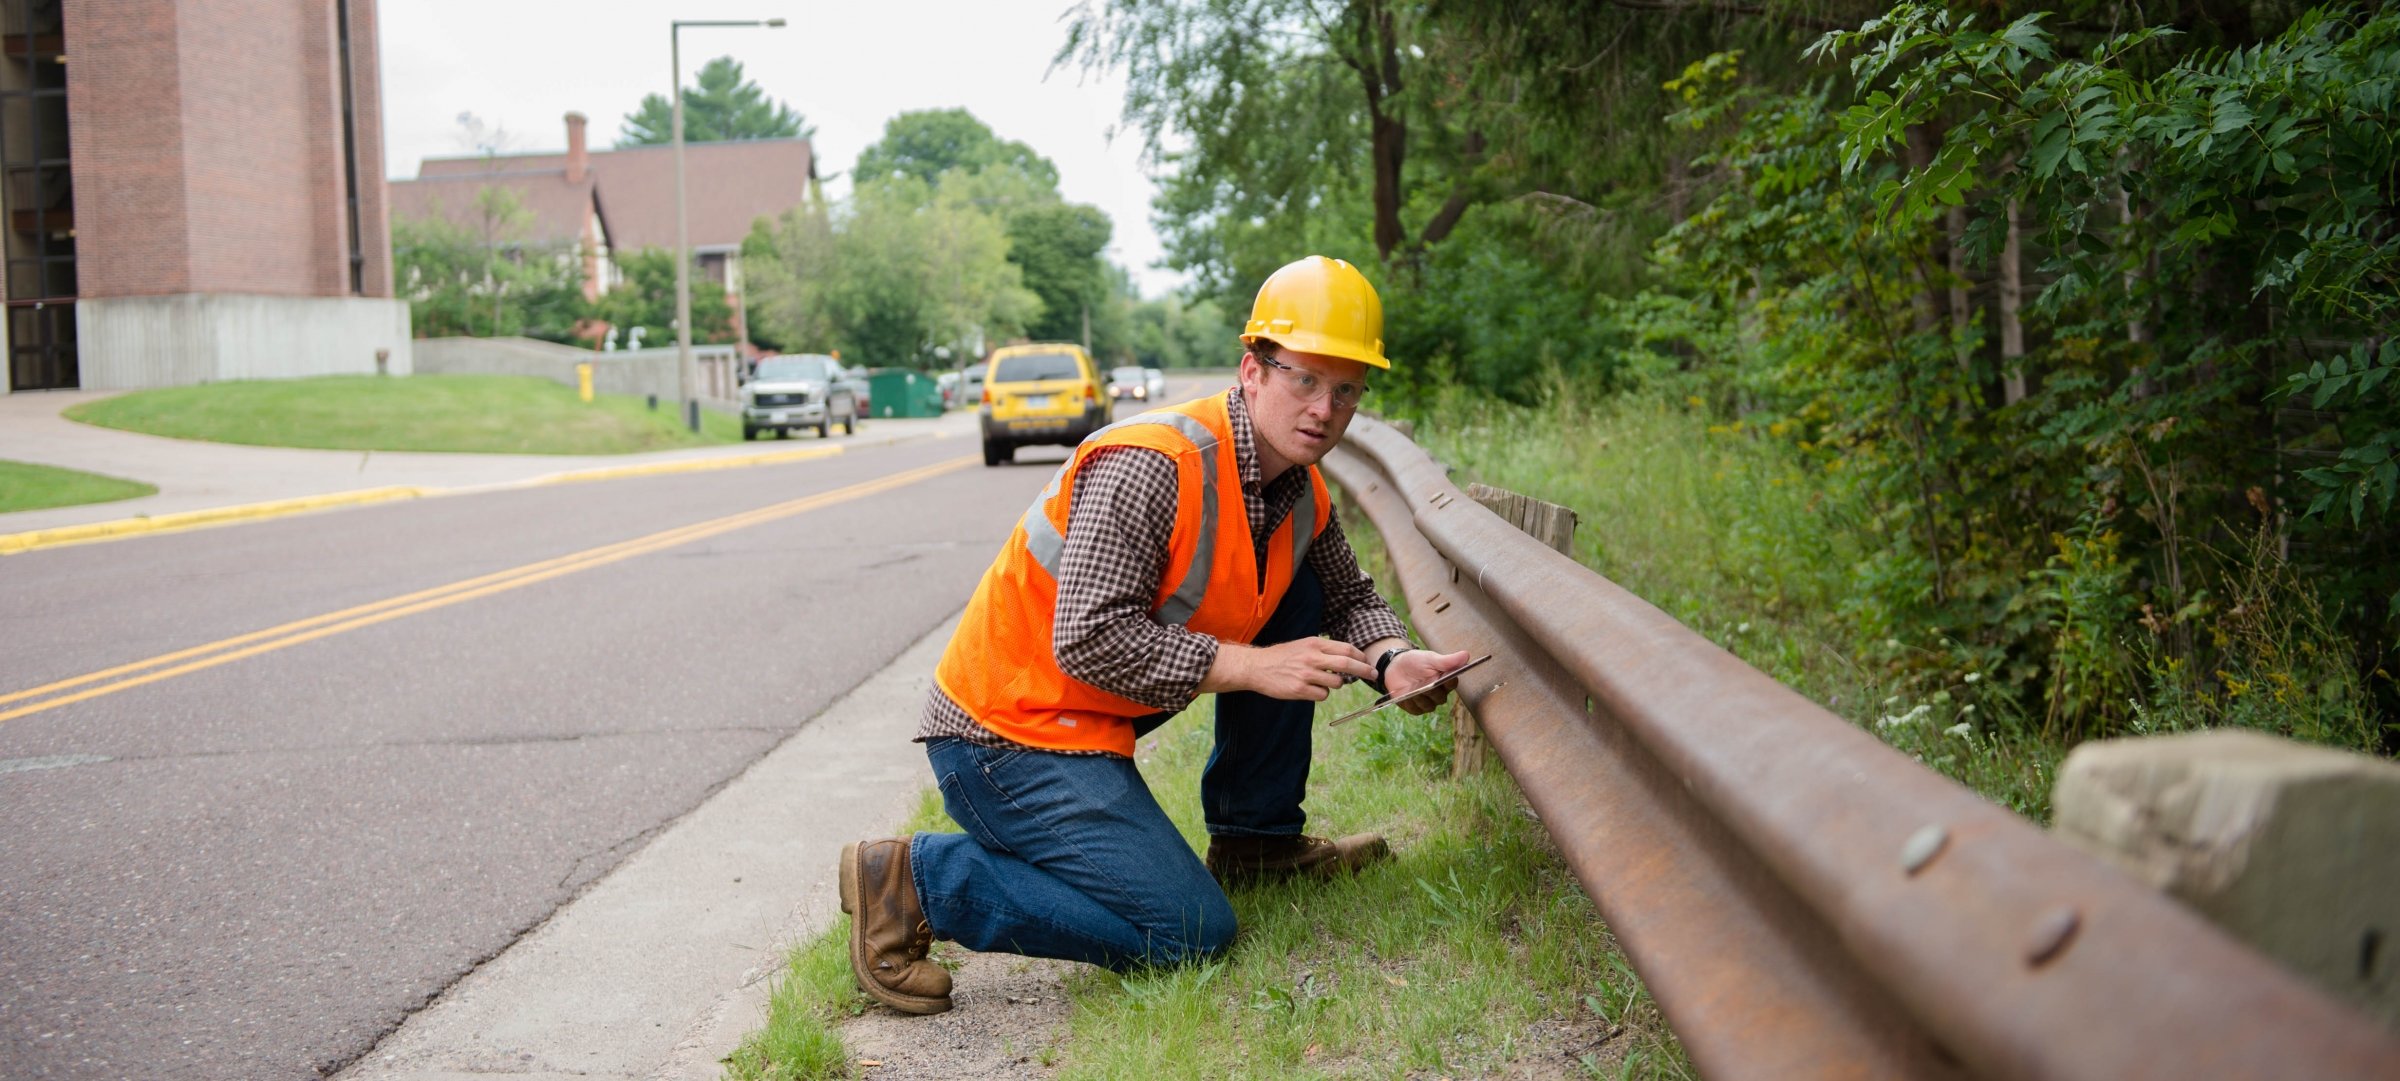 Civil engineering student in a hard hat, who is next to a guardrail on a city street.